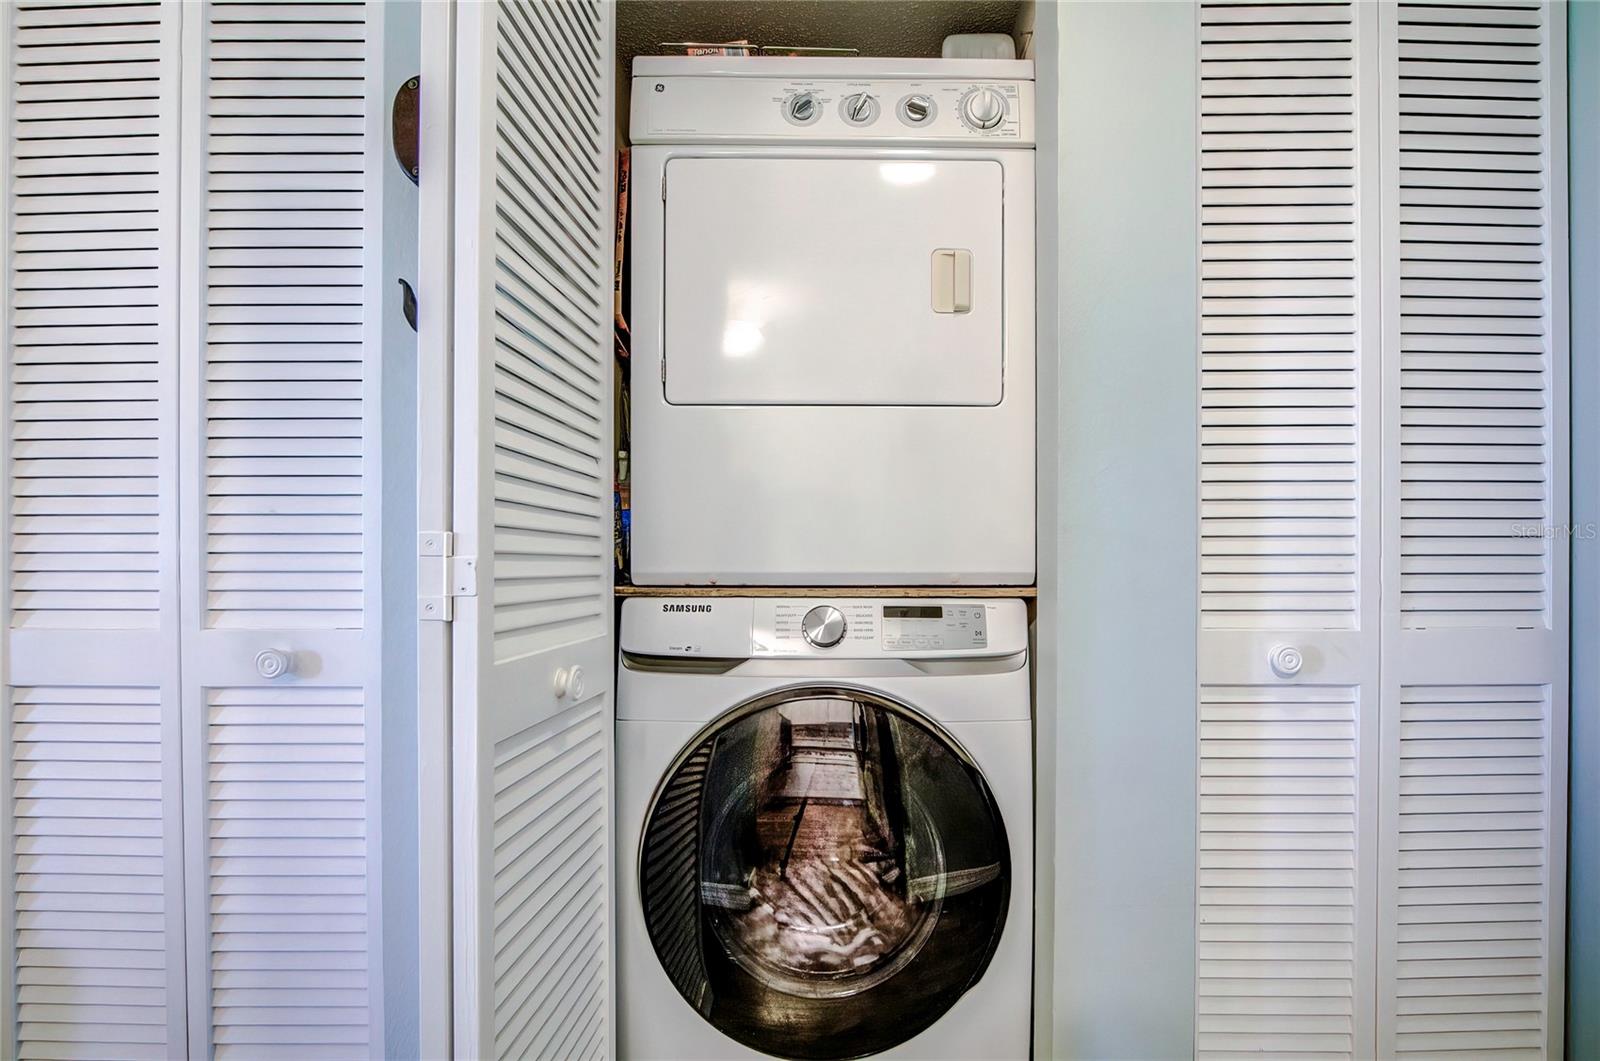 Laundry closet with washer and dryer.